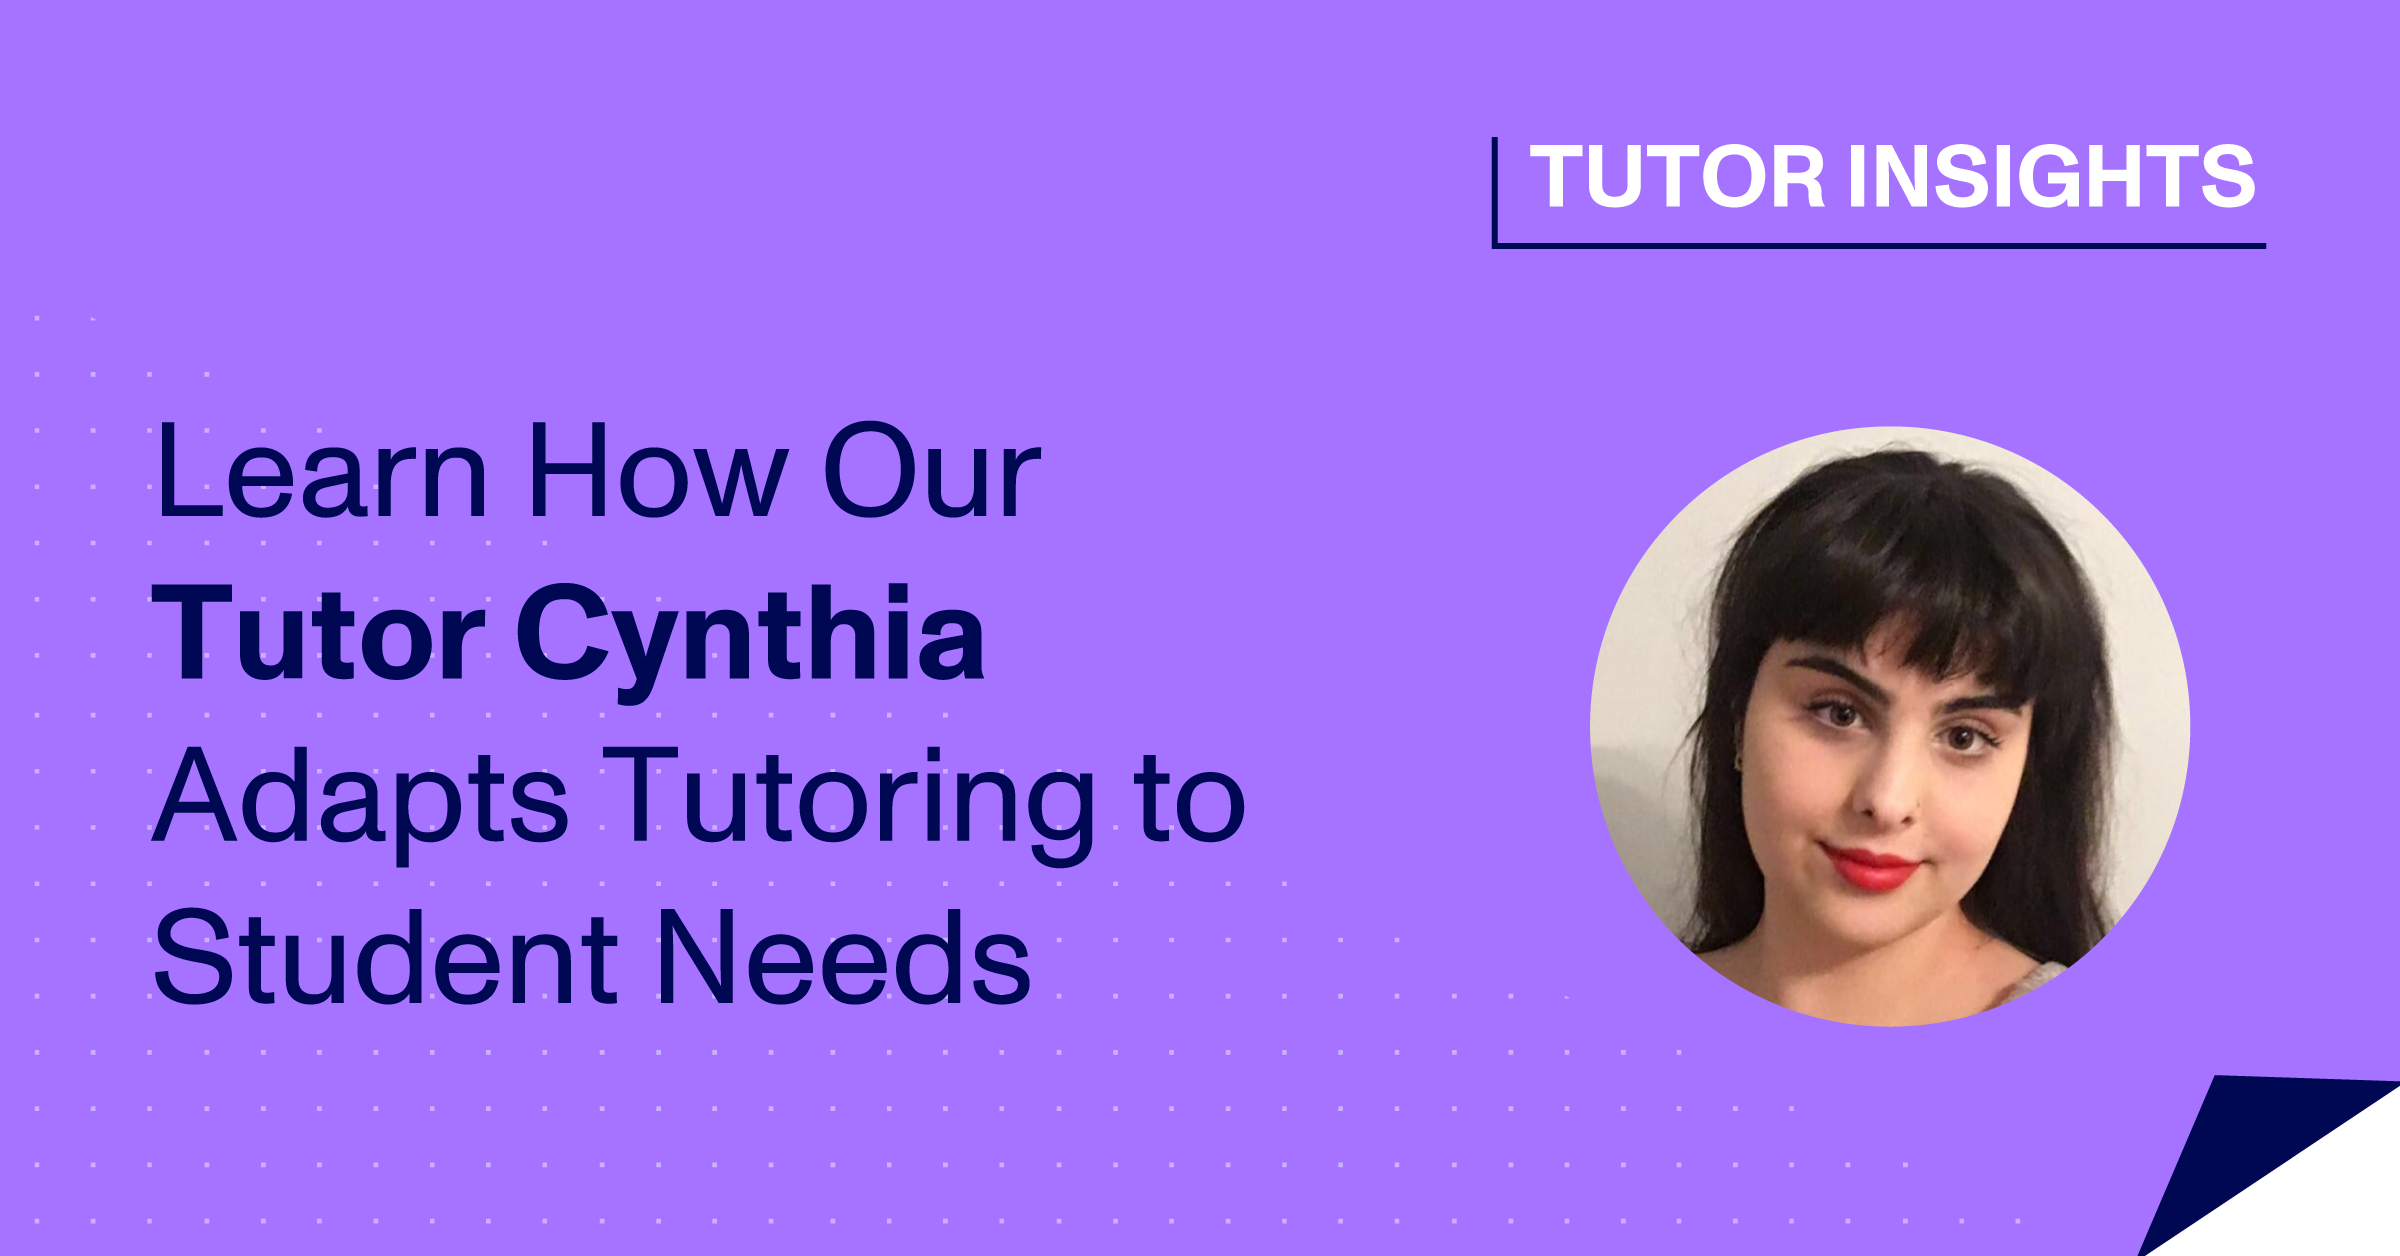 Learn How Our Tutor Cynthia Adapts Tutoring to Student Needs